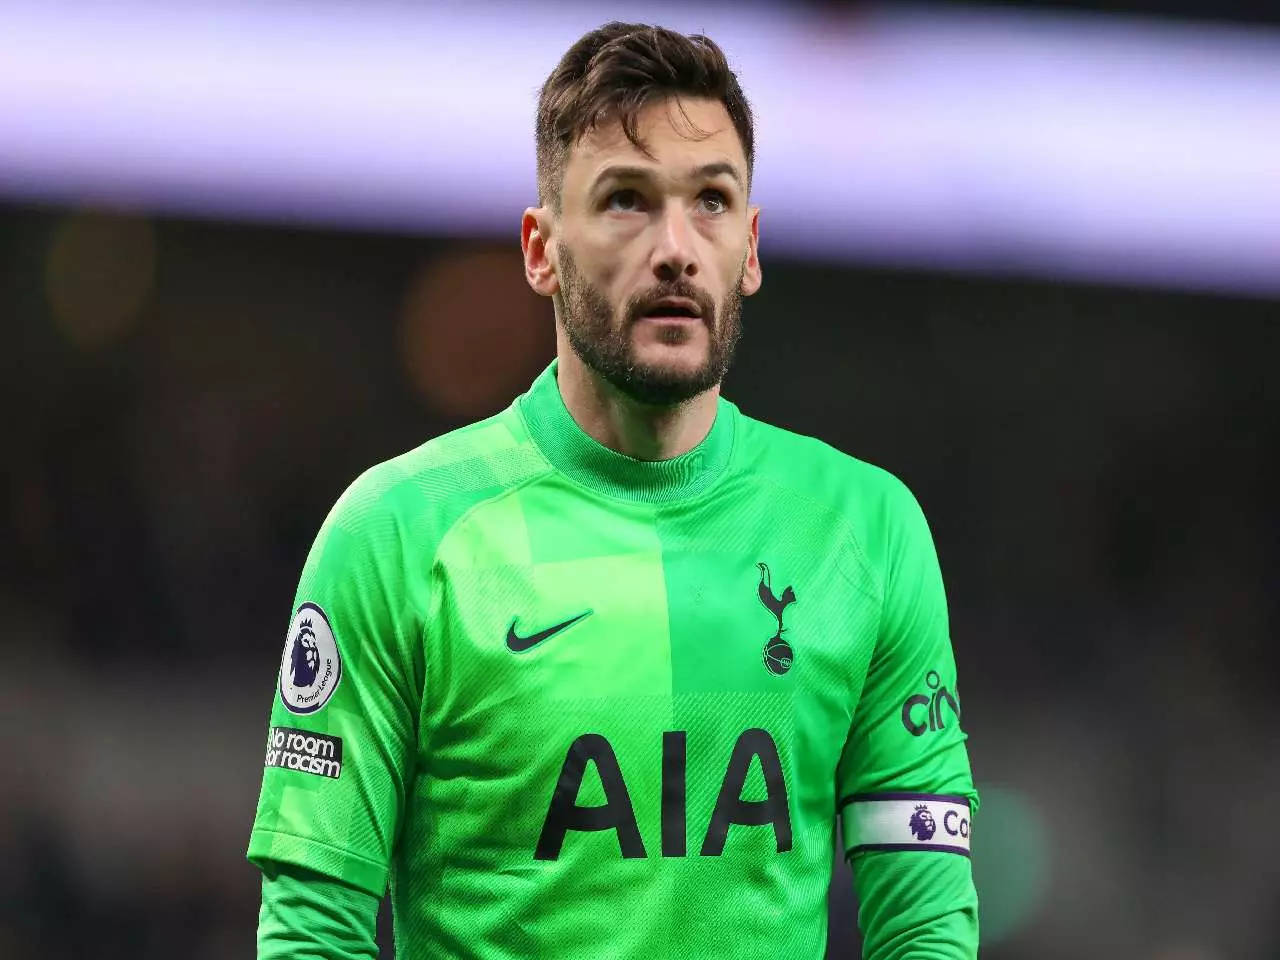 Caption: Hugo Lloris In Action With His Green Jersey